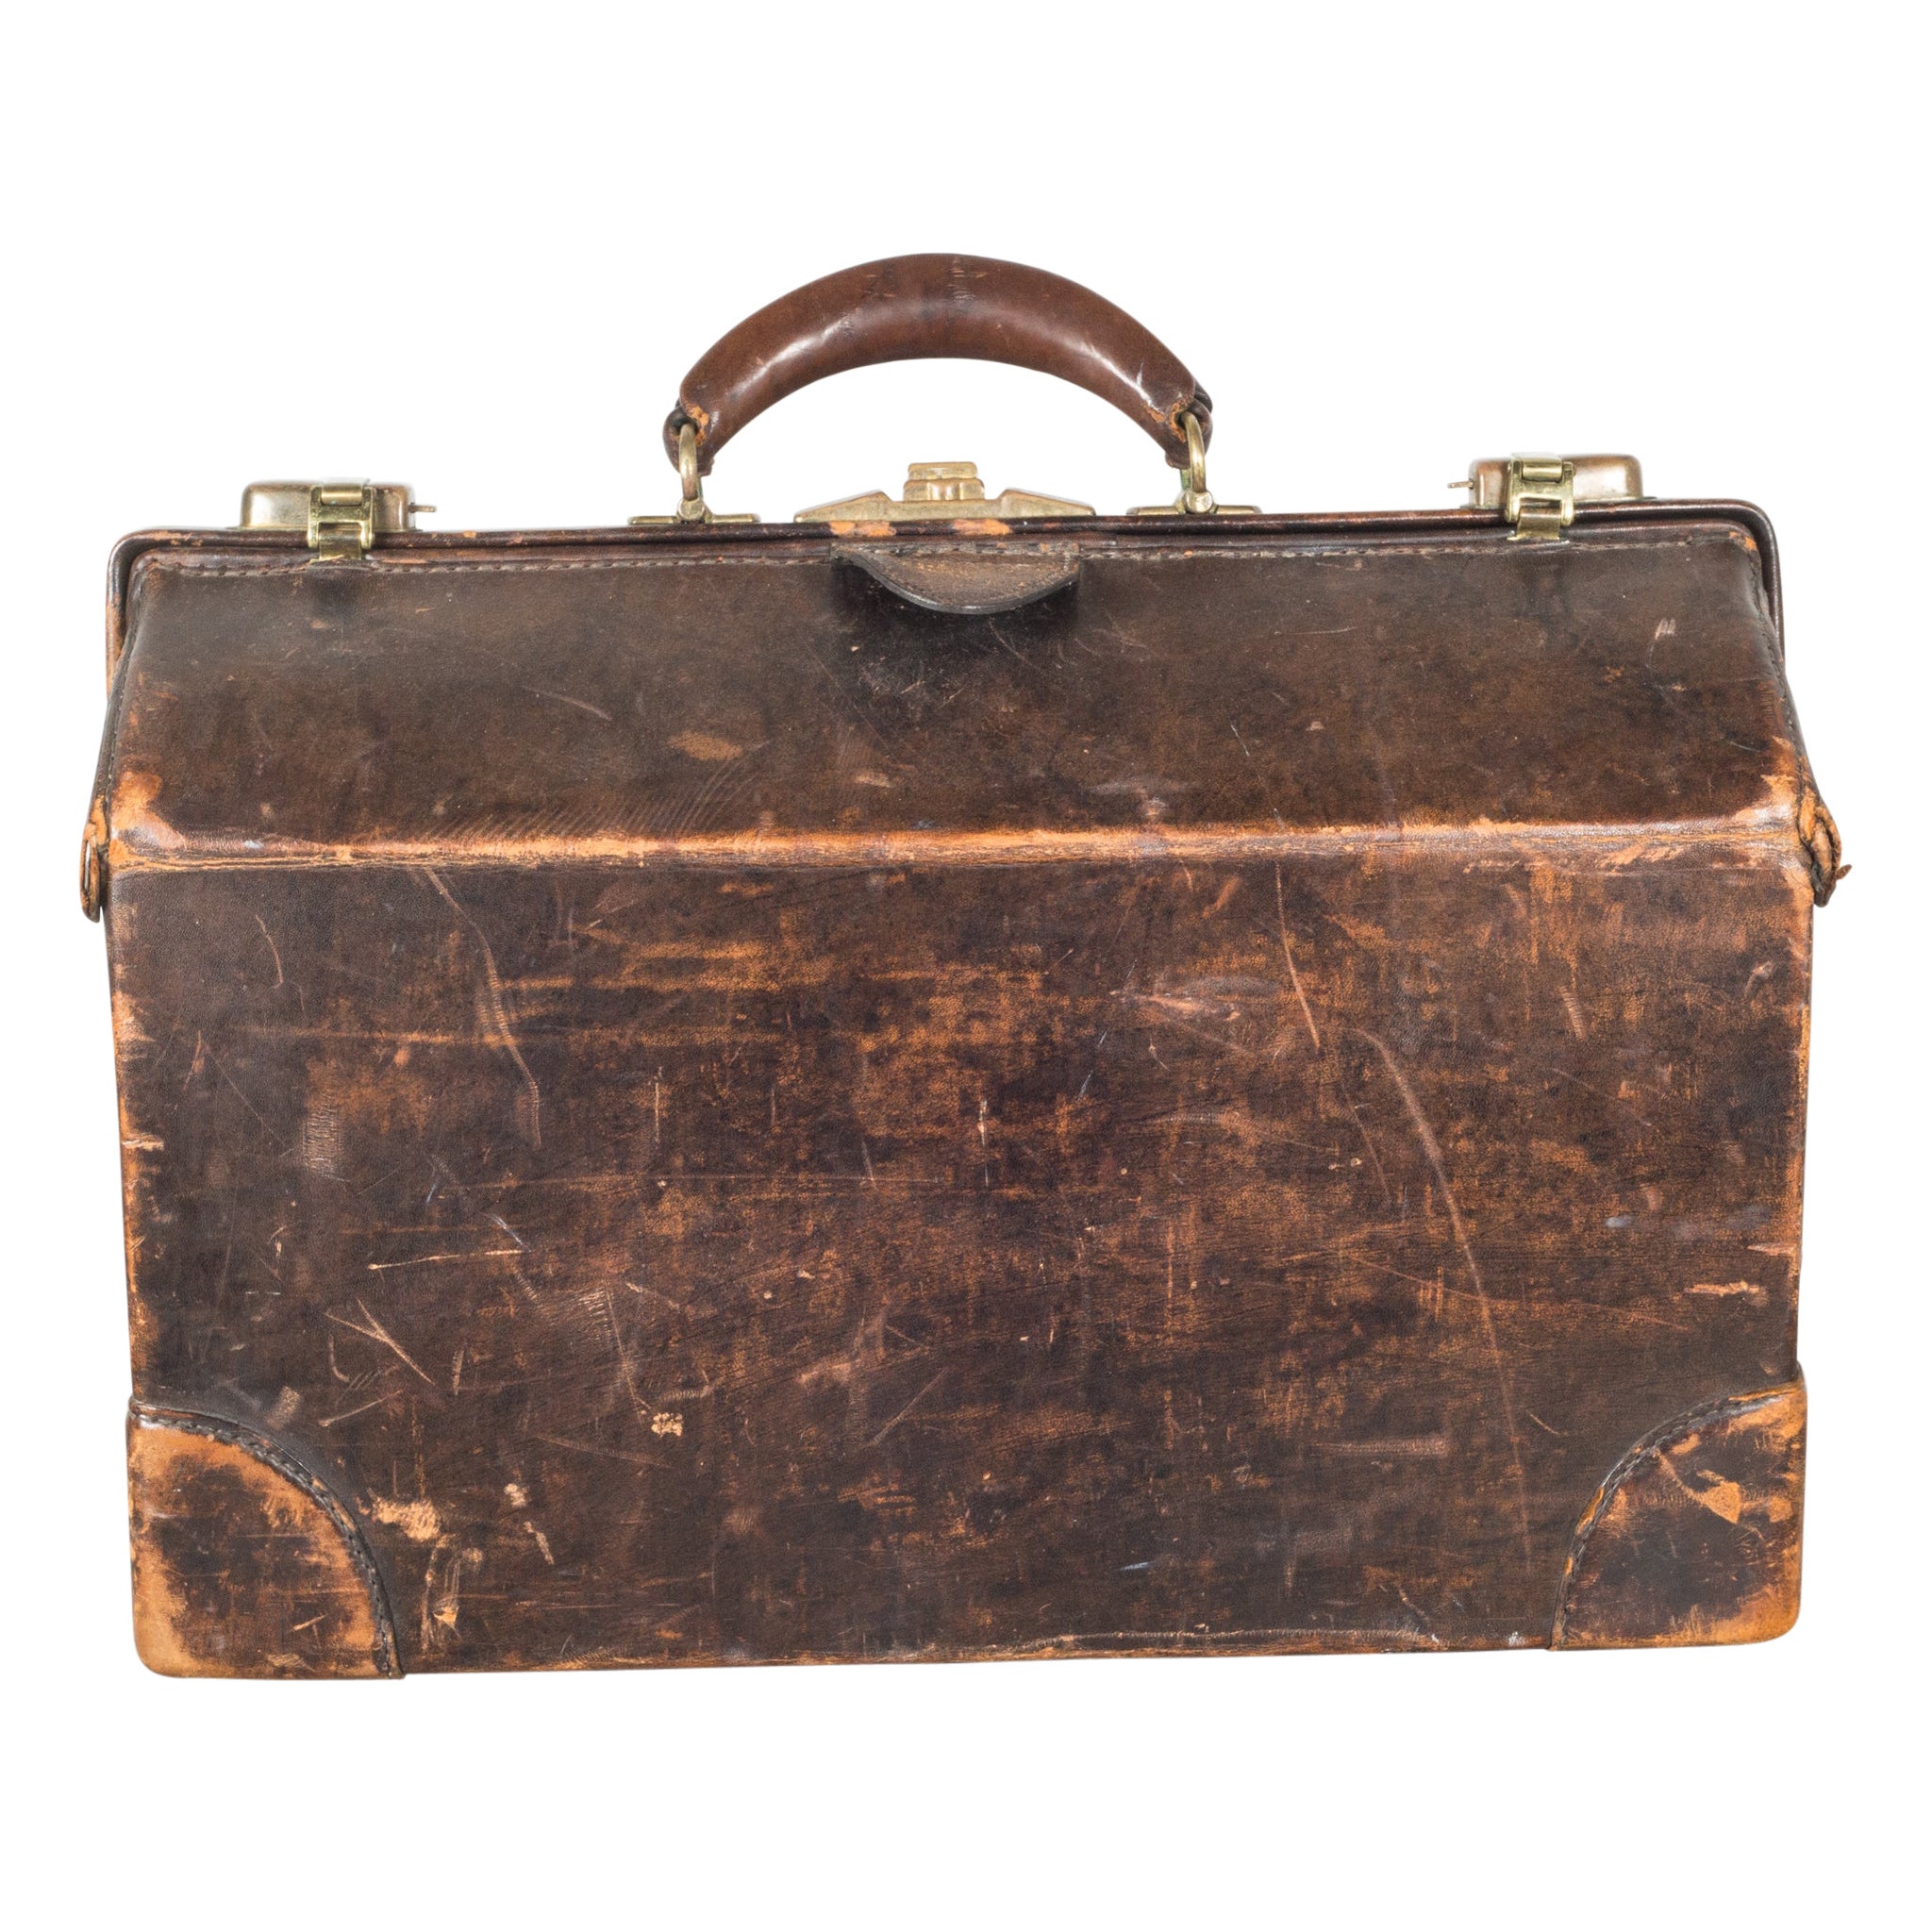 Antique Leather Doctor's Examination House Call Bag, c.1930-1940